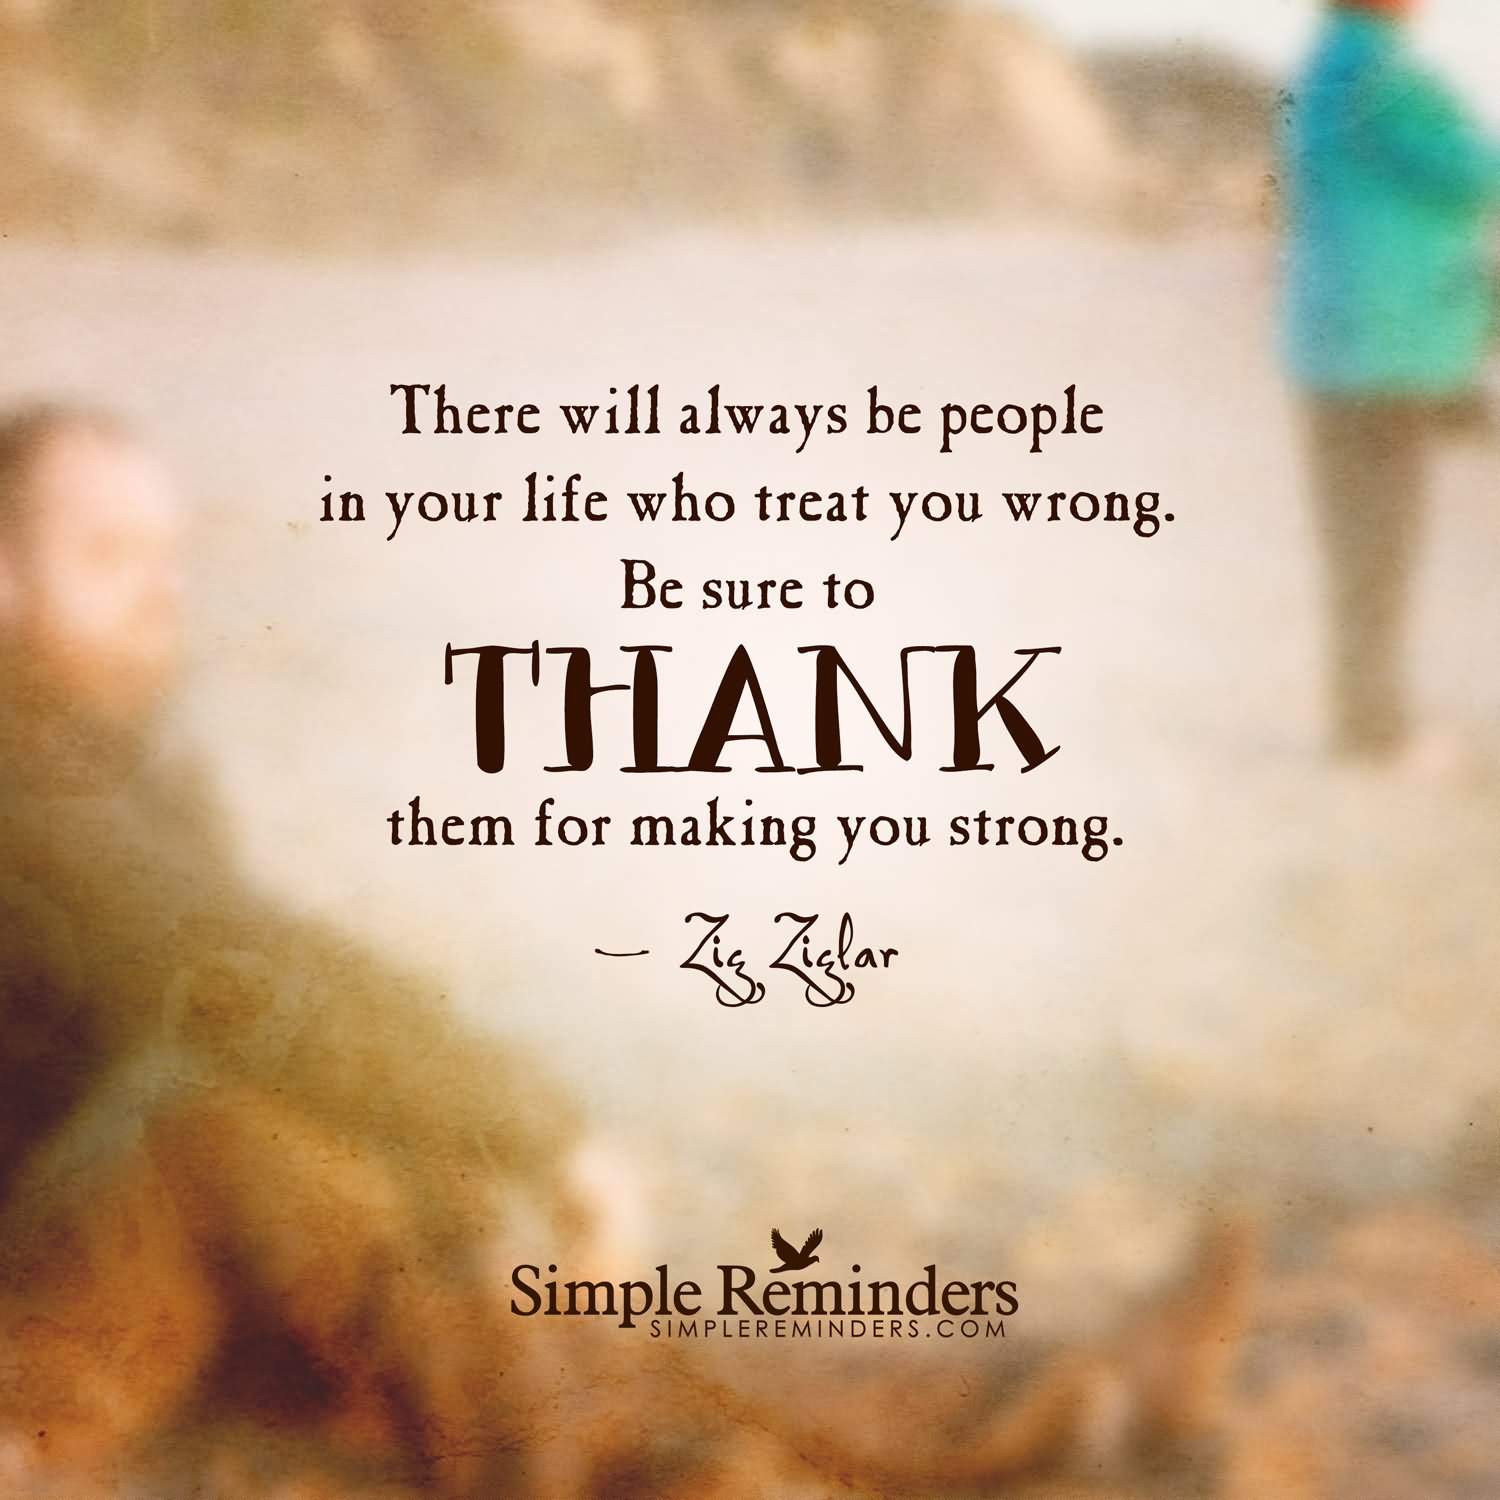 There will always be People in your life who Treat you Wrong. Be sure to Thank Them for Making you Strong.